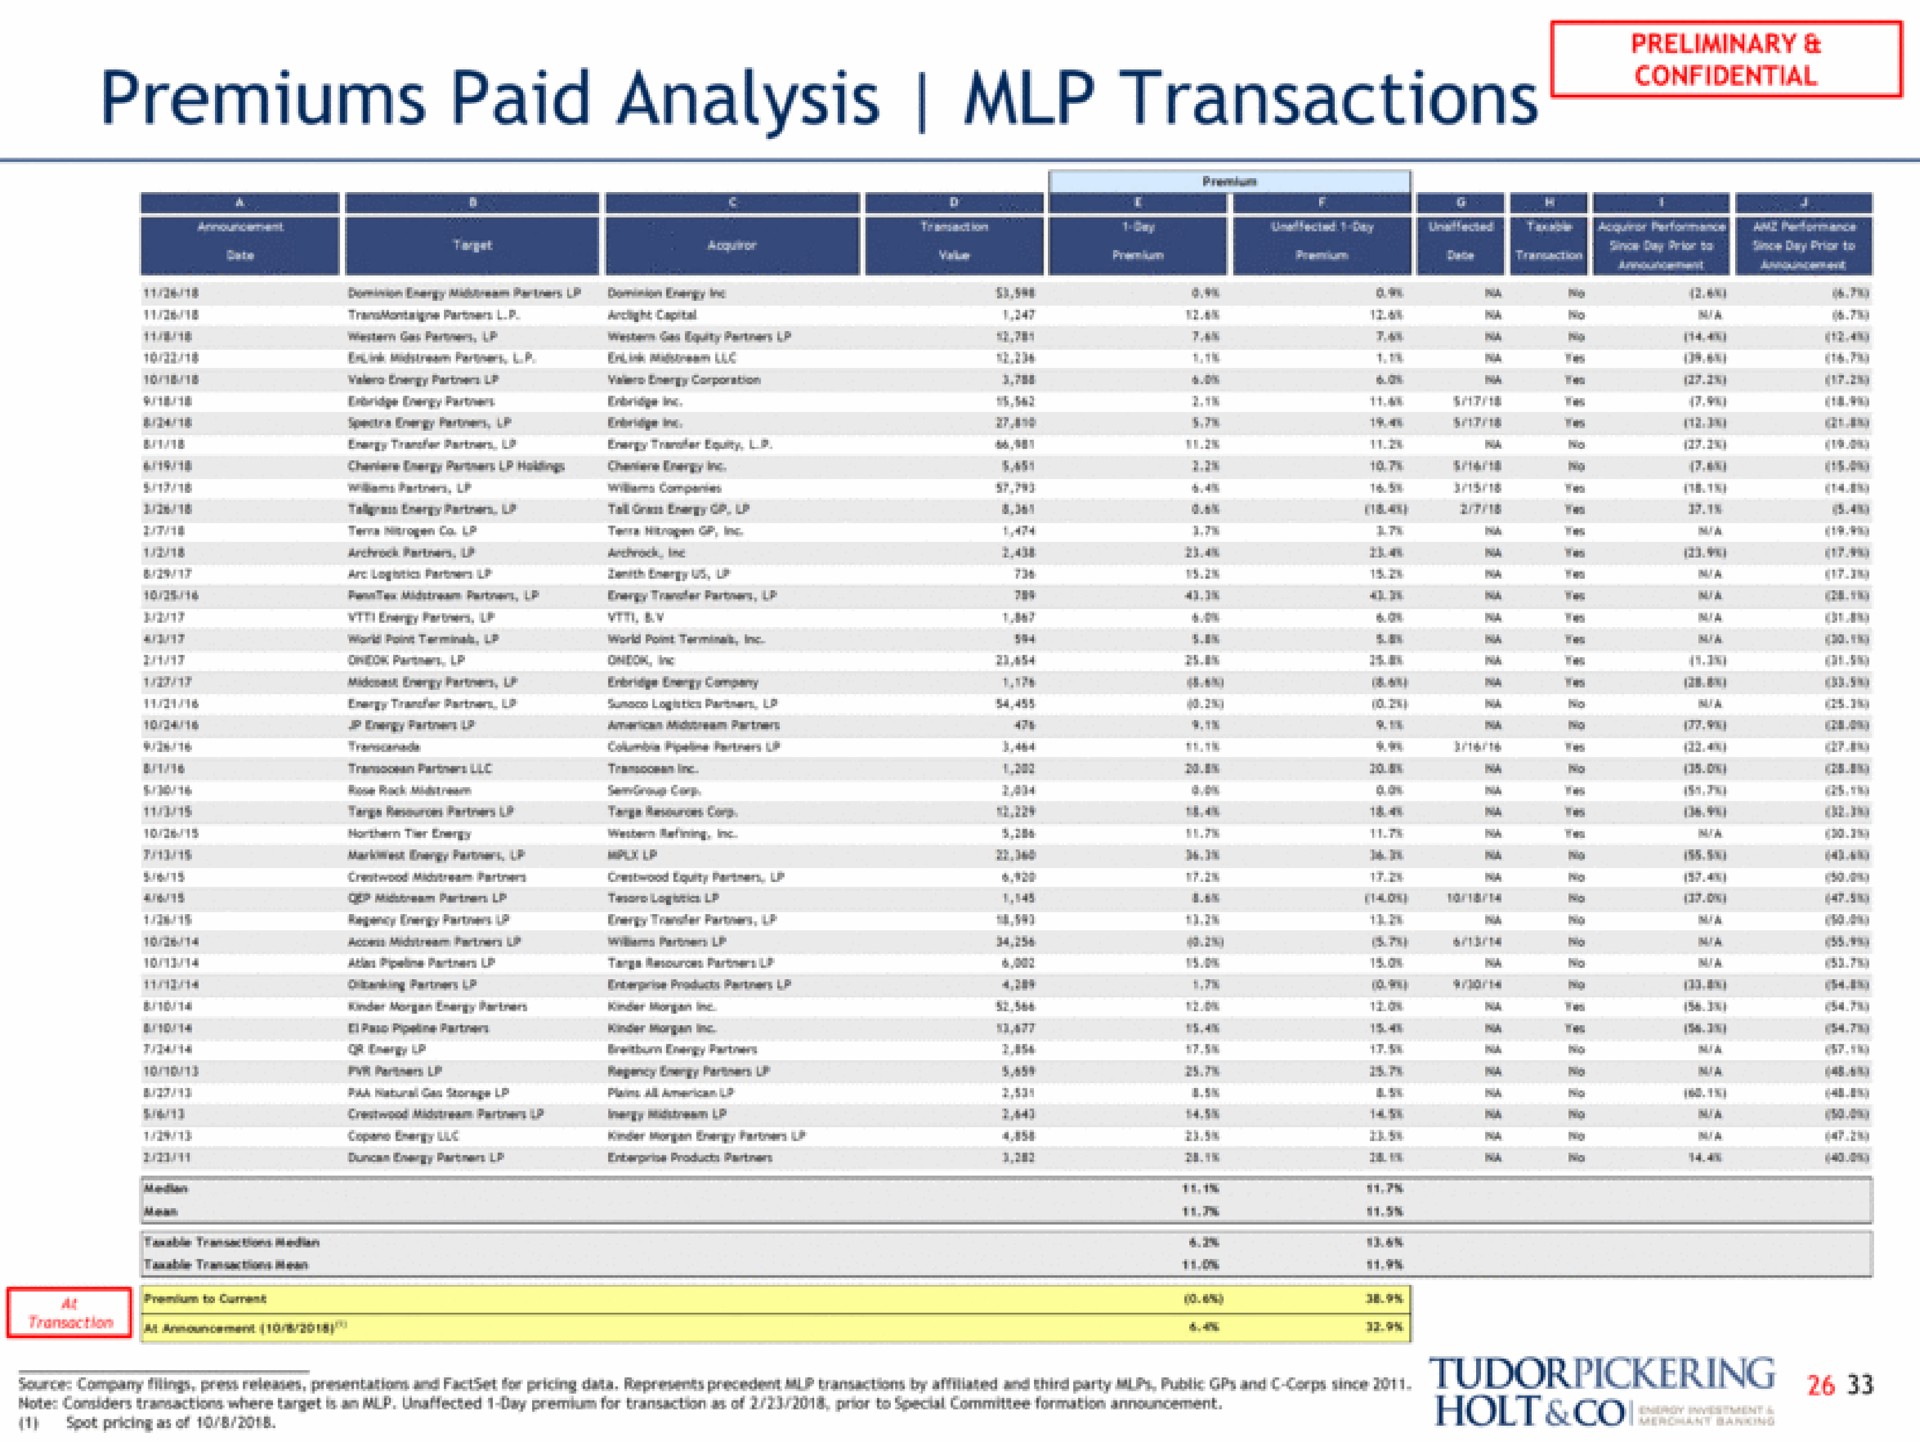 premiums paid analysis transactions | Tudor, Pickering, Holt & Co